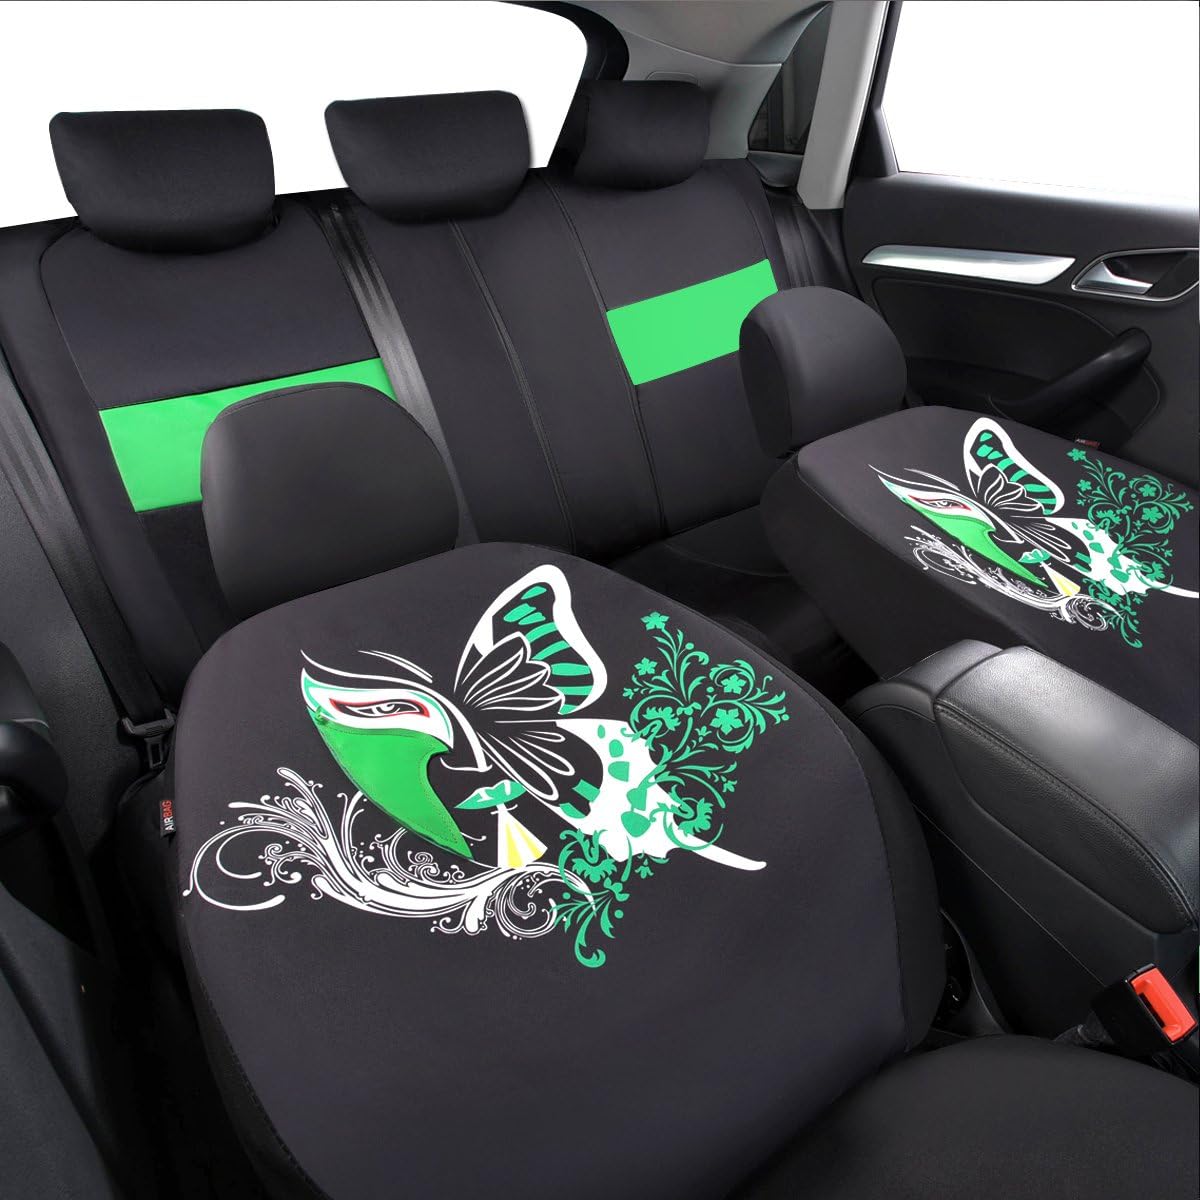 CAR PASS Green Leather & Gaberdine Butterfly Inspiration Car Seat Covers, Universal Car Seat Covers Full Set with Airbag Compatiable, Fit for Vehicles,Cars,Suvs,Vans(Black and Green)